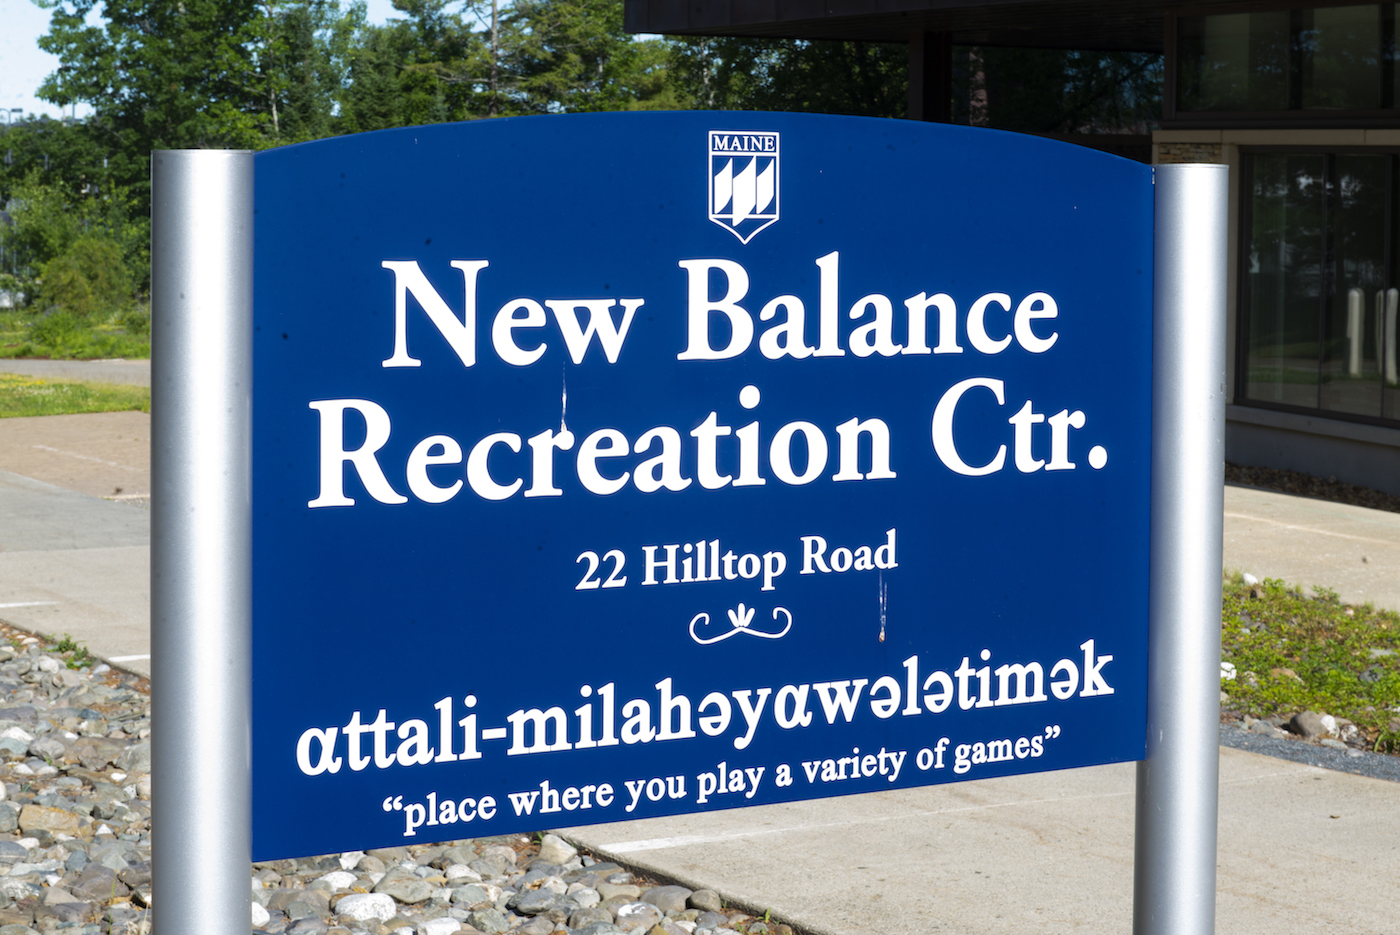 A photo of the sign outside the New Balance Recreation Center